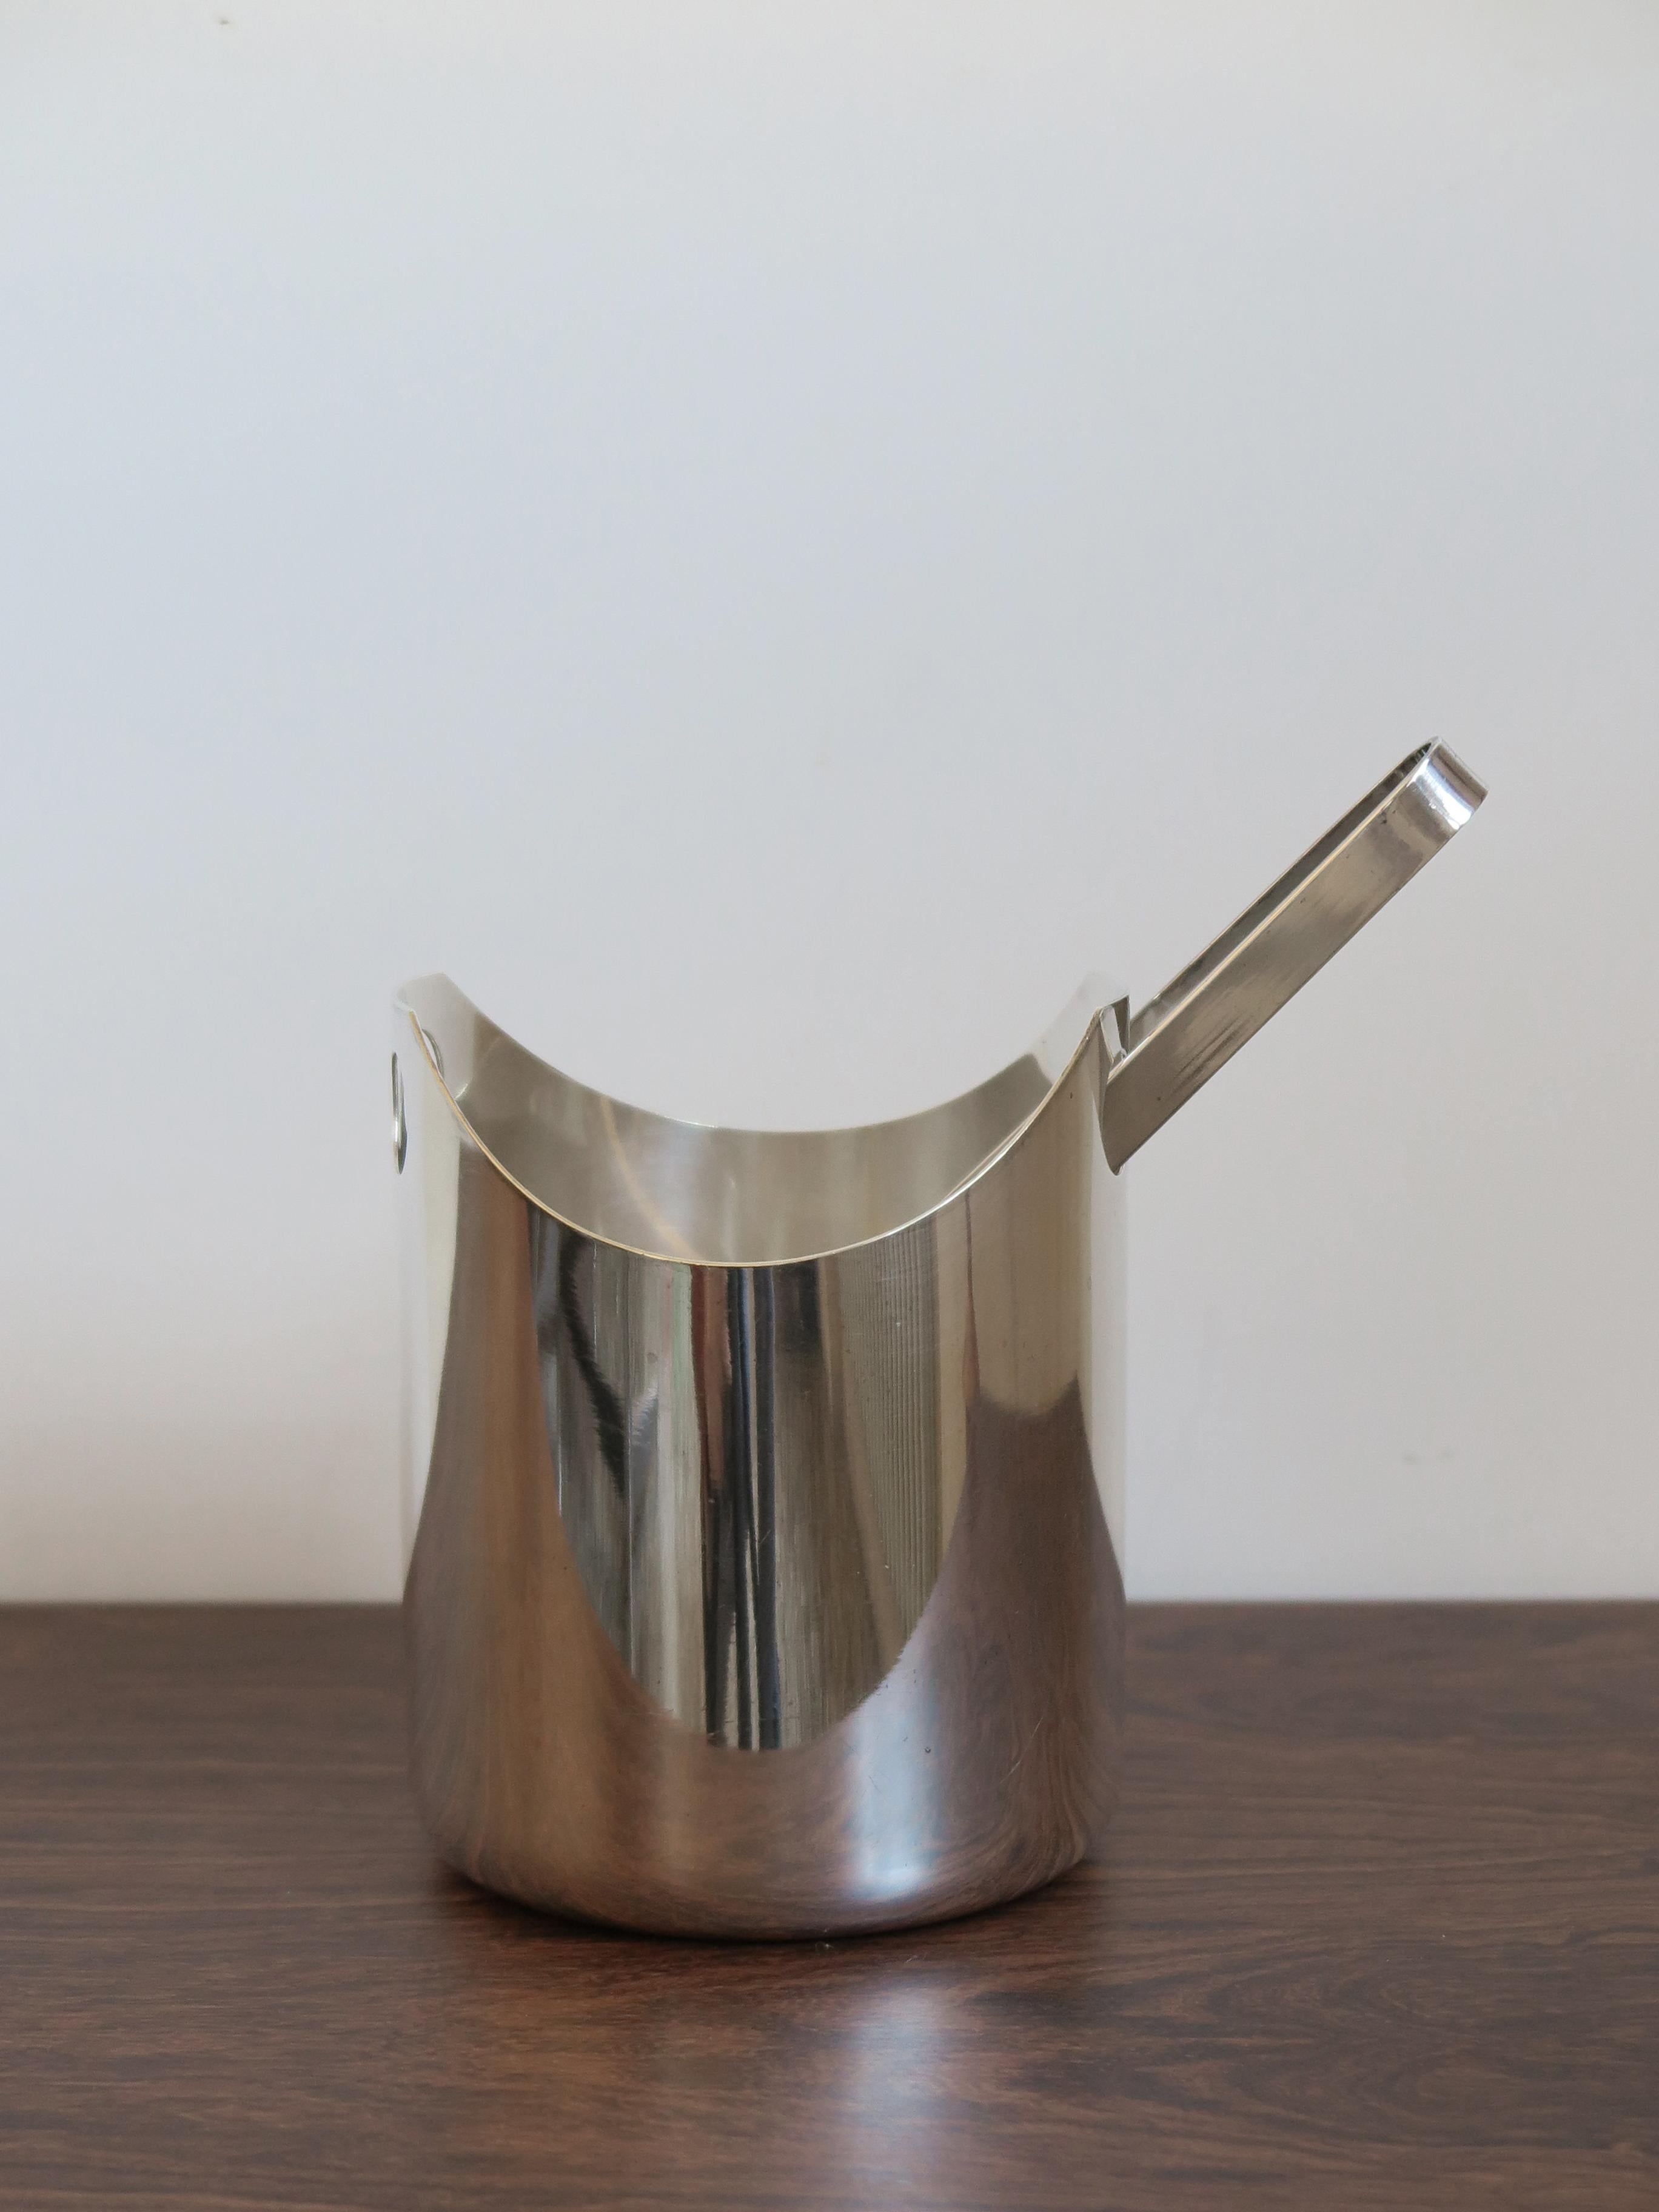 Italian Mid-Century Modern design ice bucket with removable pliers in silver metal designed by Lino Sabattini, engraved Sabattini Made in Italy brand, 1960s

Please note that the item is original of the period and this shows normal signs of age